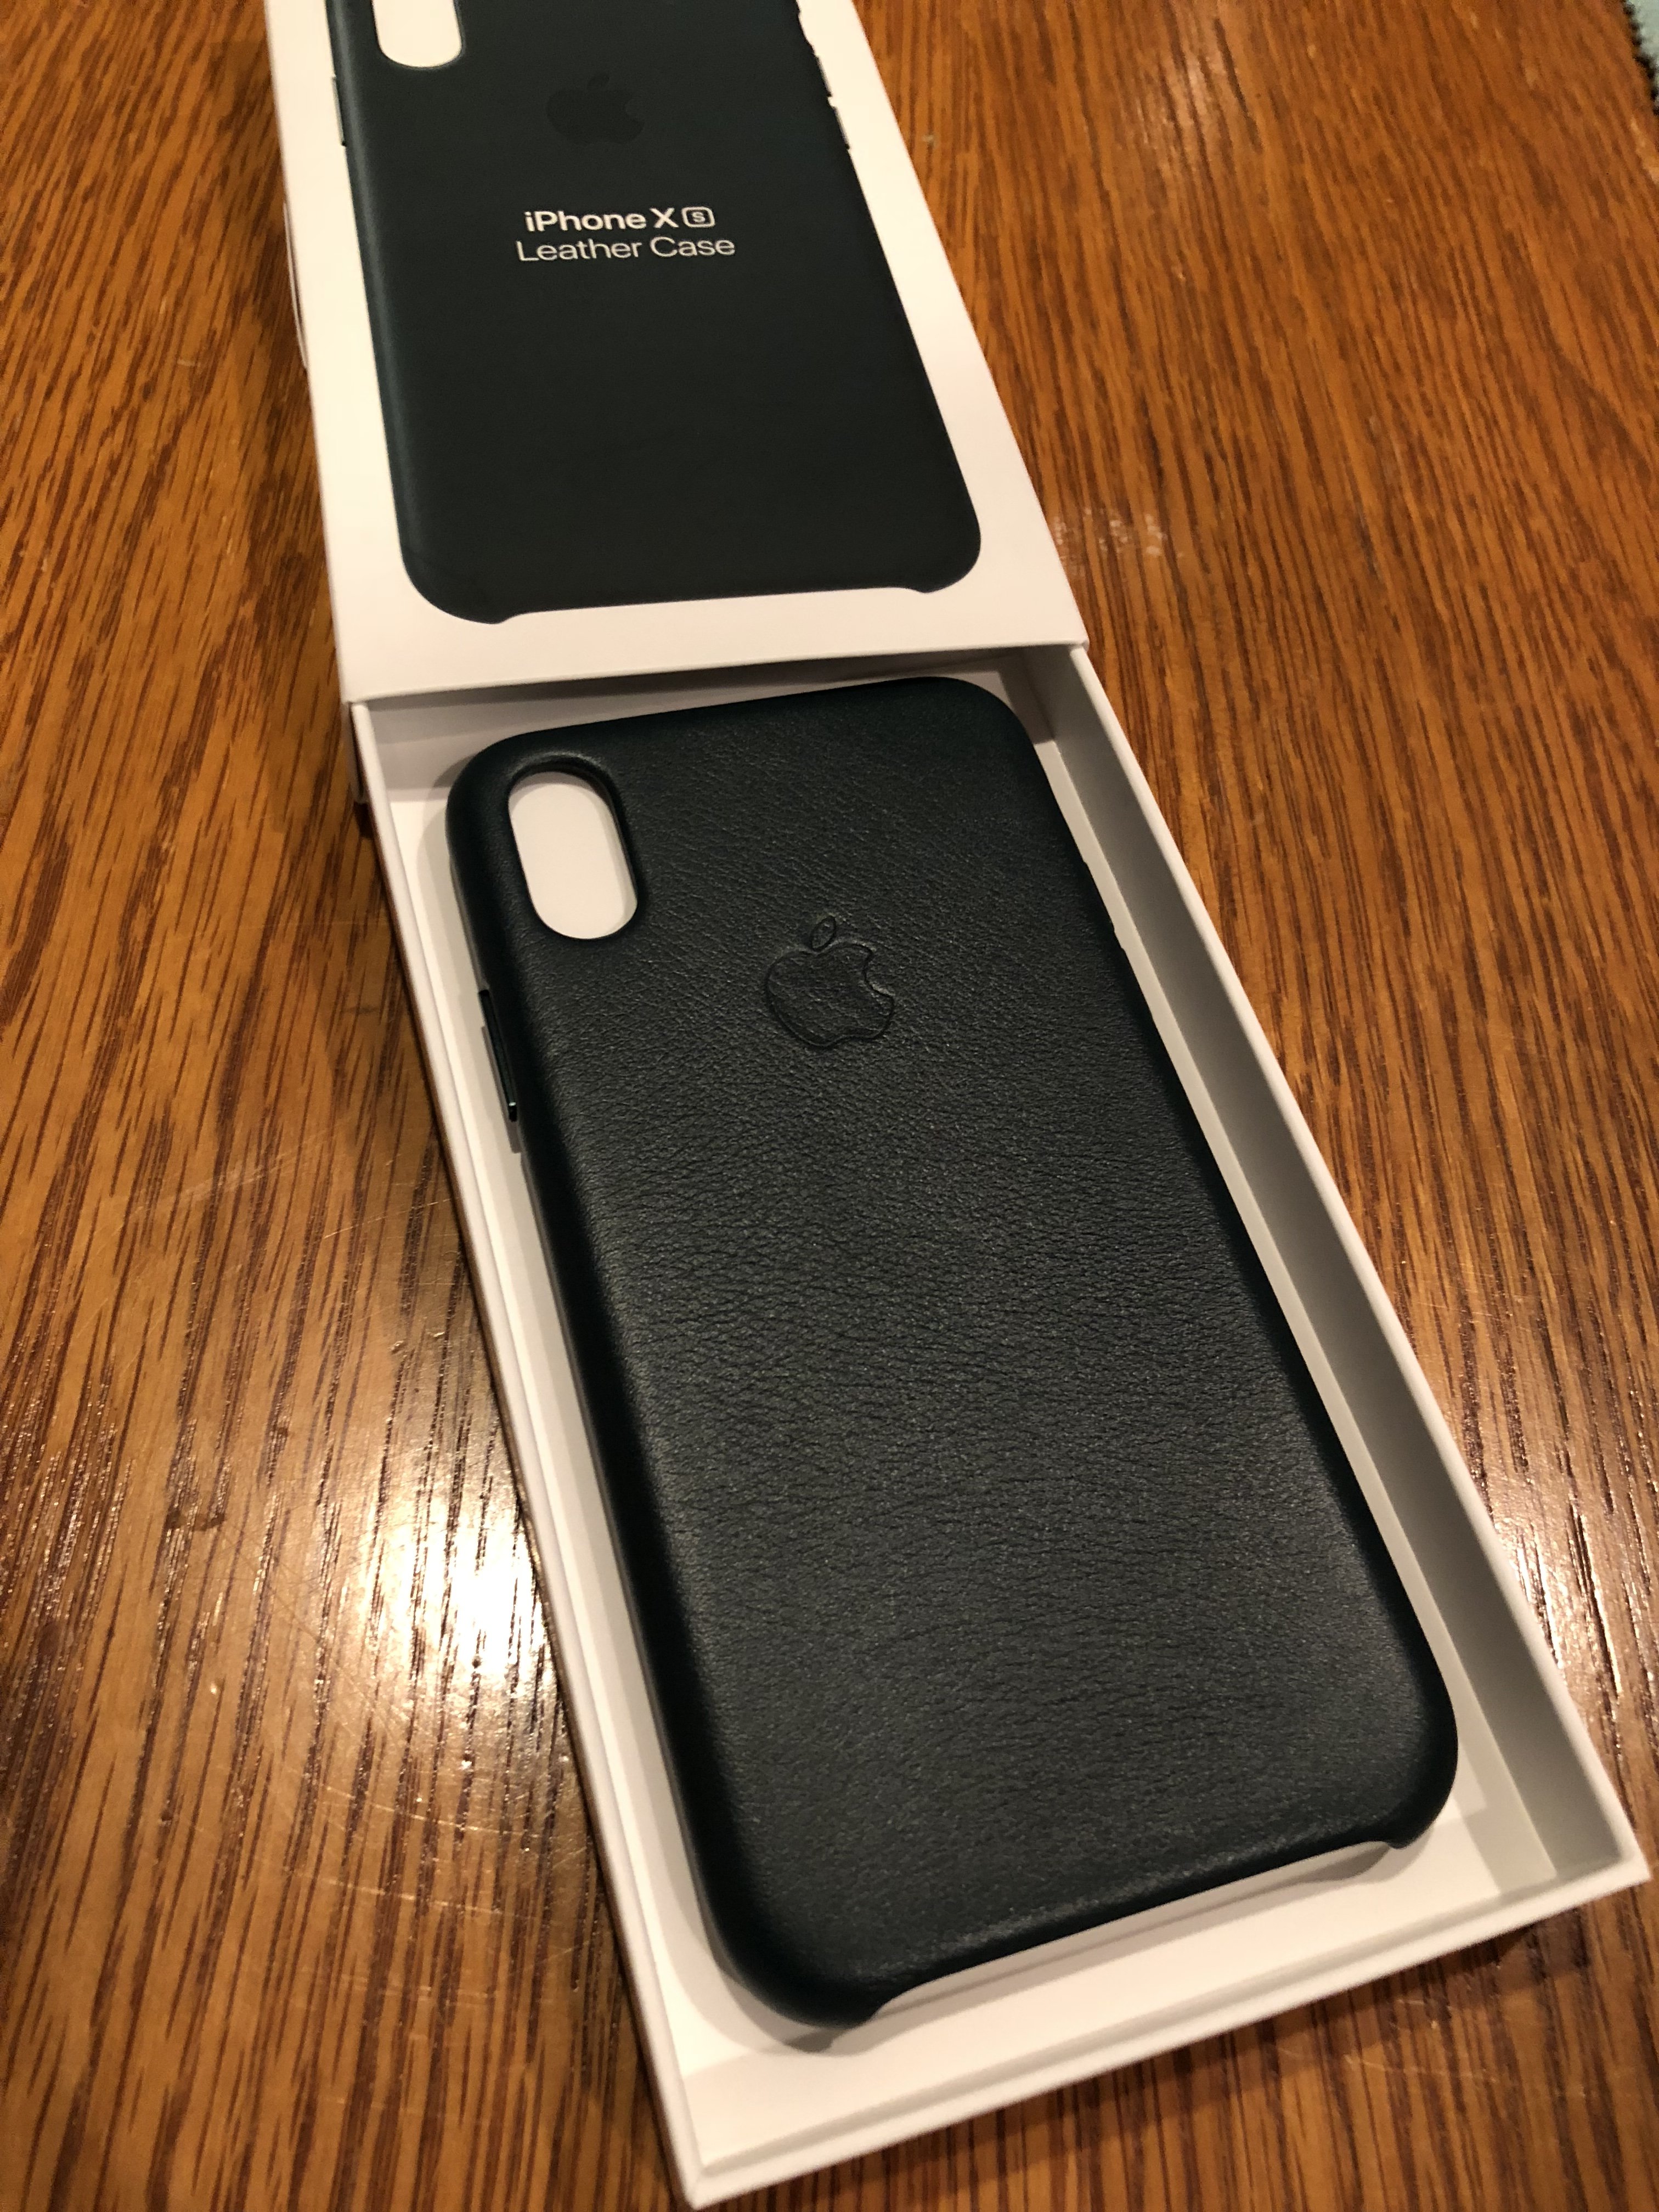 Just Picked Up Leather Forest Green Xs Case For My Iphone X Fits